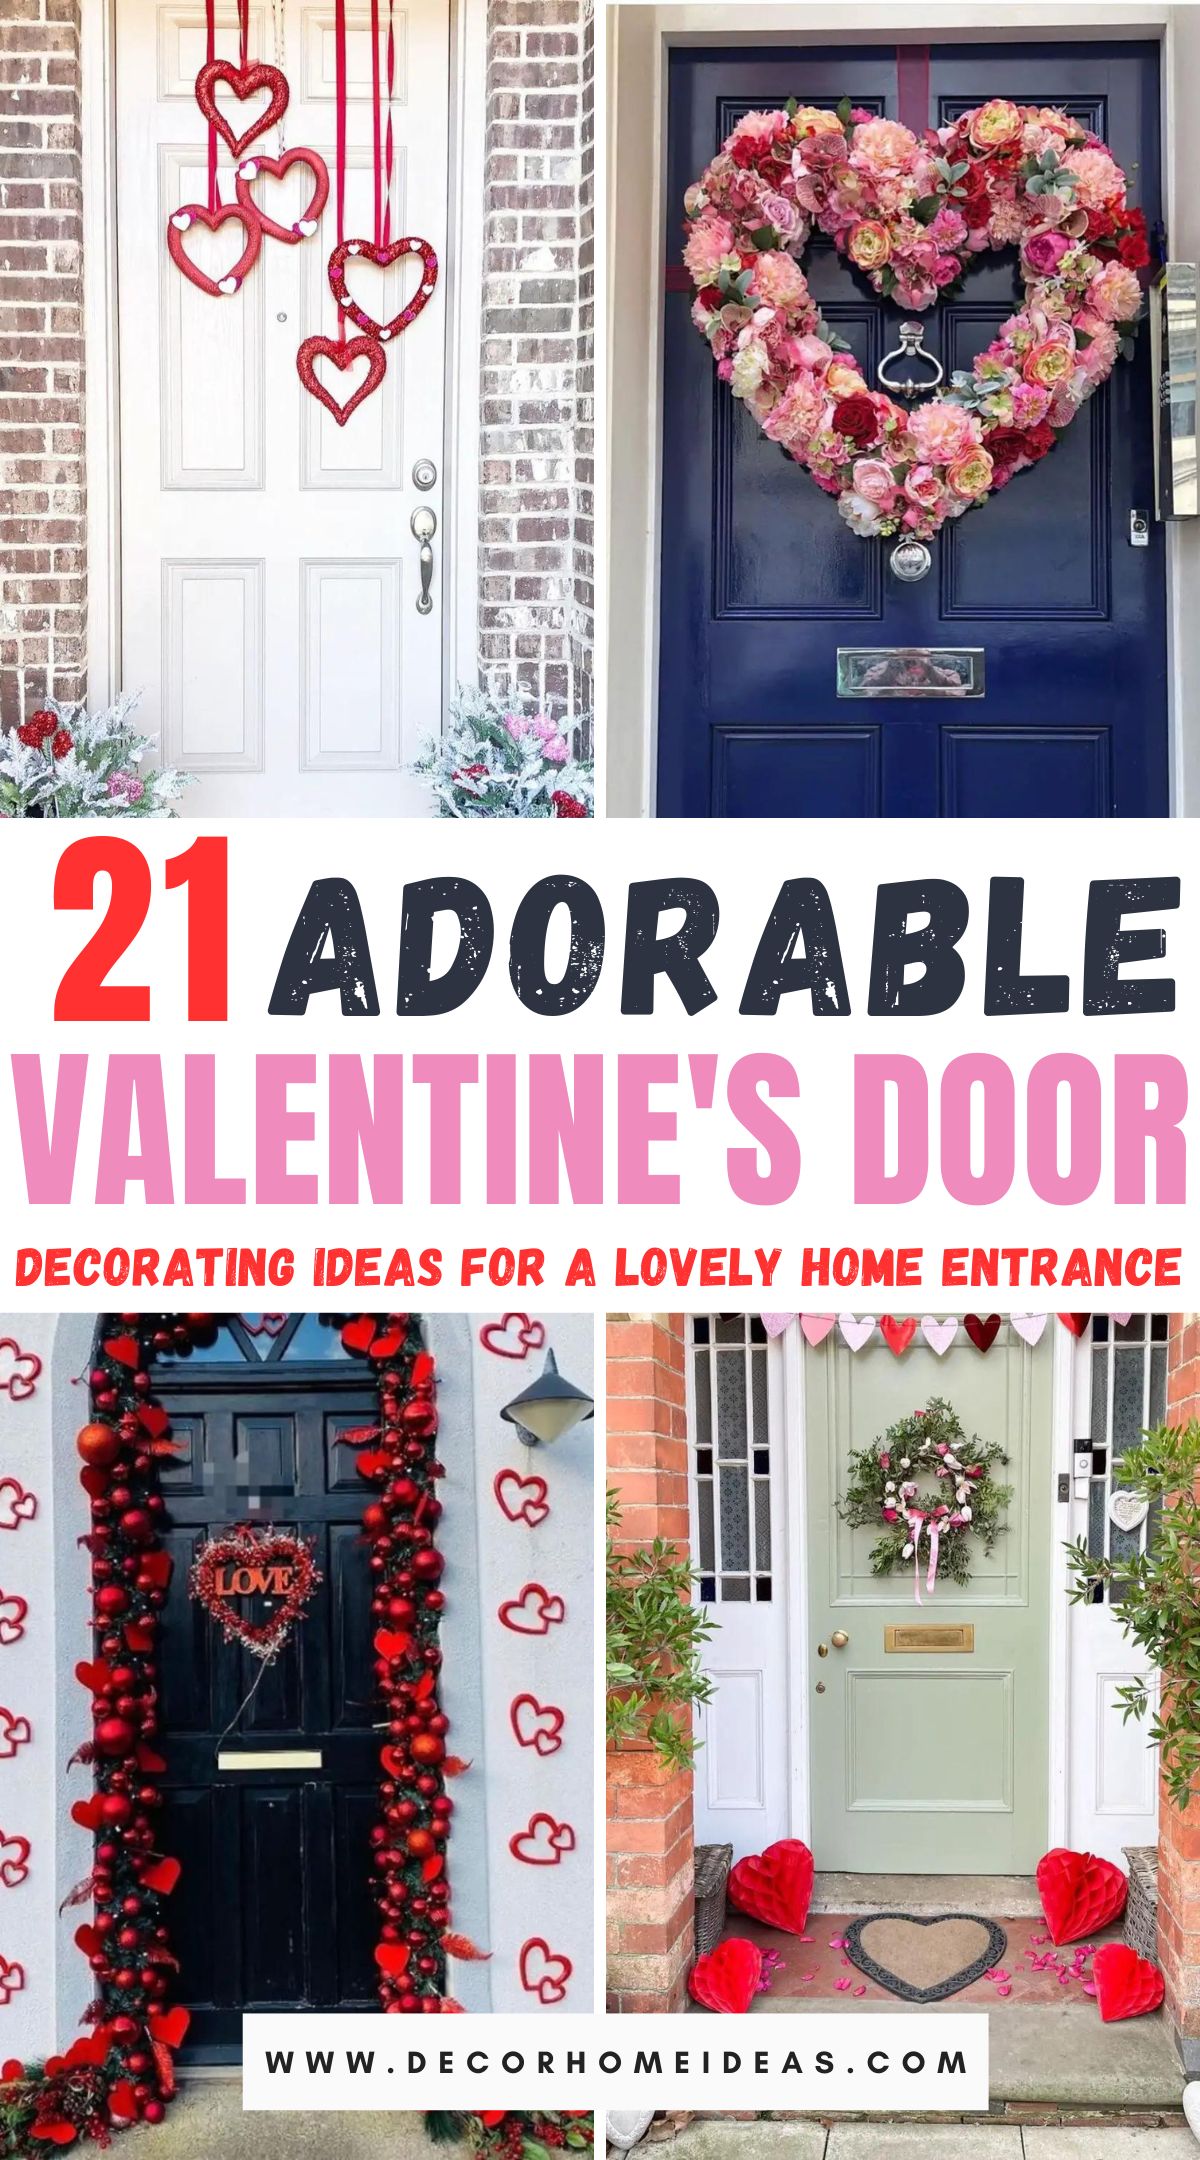 Embrace the spirit of love with these 21 heartwarming Valentine's door decorations. Welcome love home with charming and creative ways to adorn your entrance and share the warmth of the season.